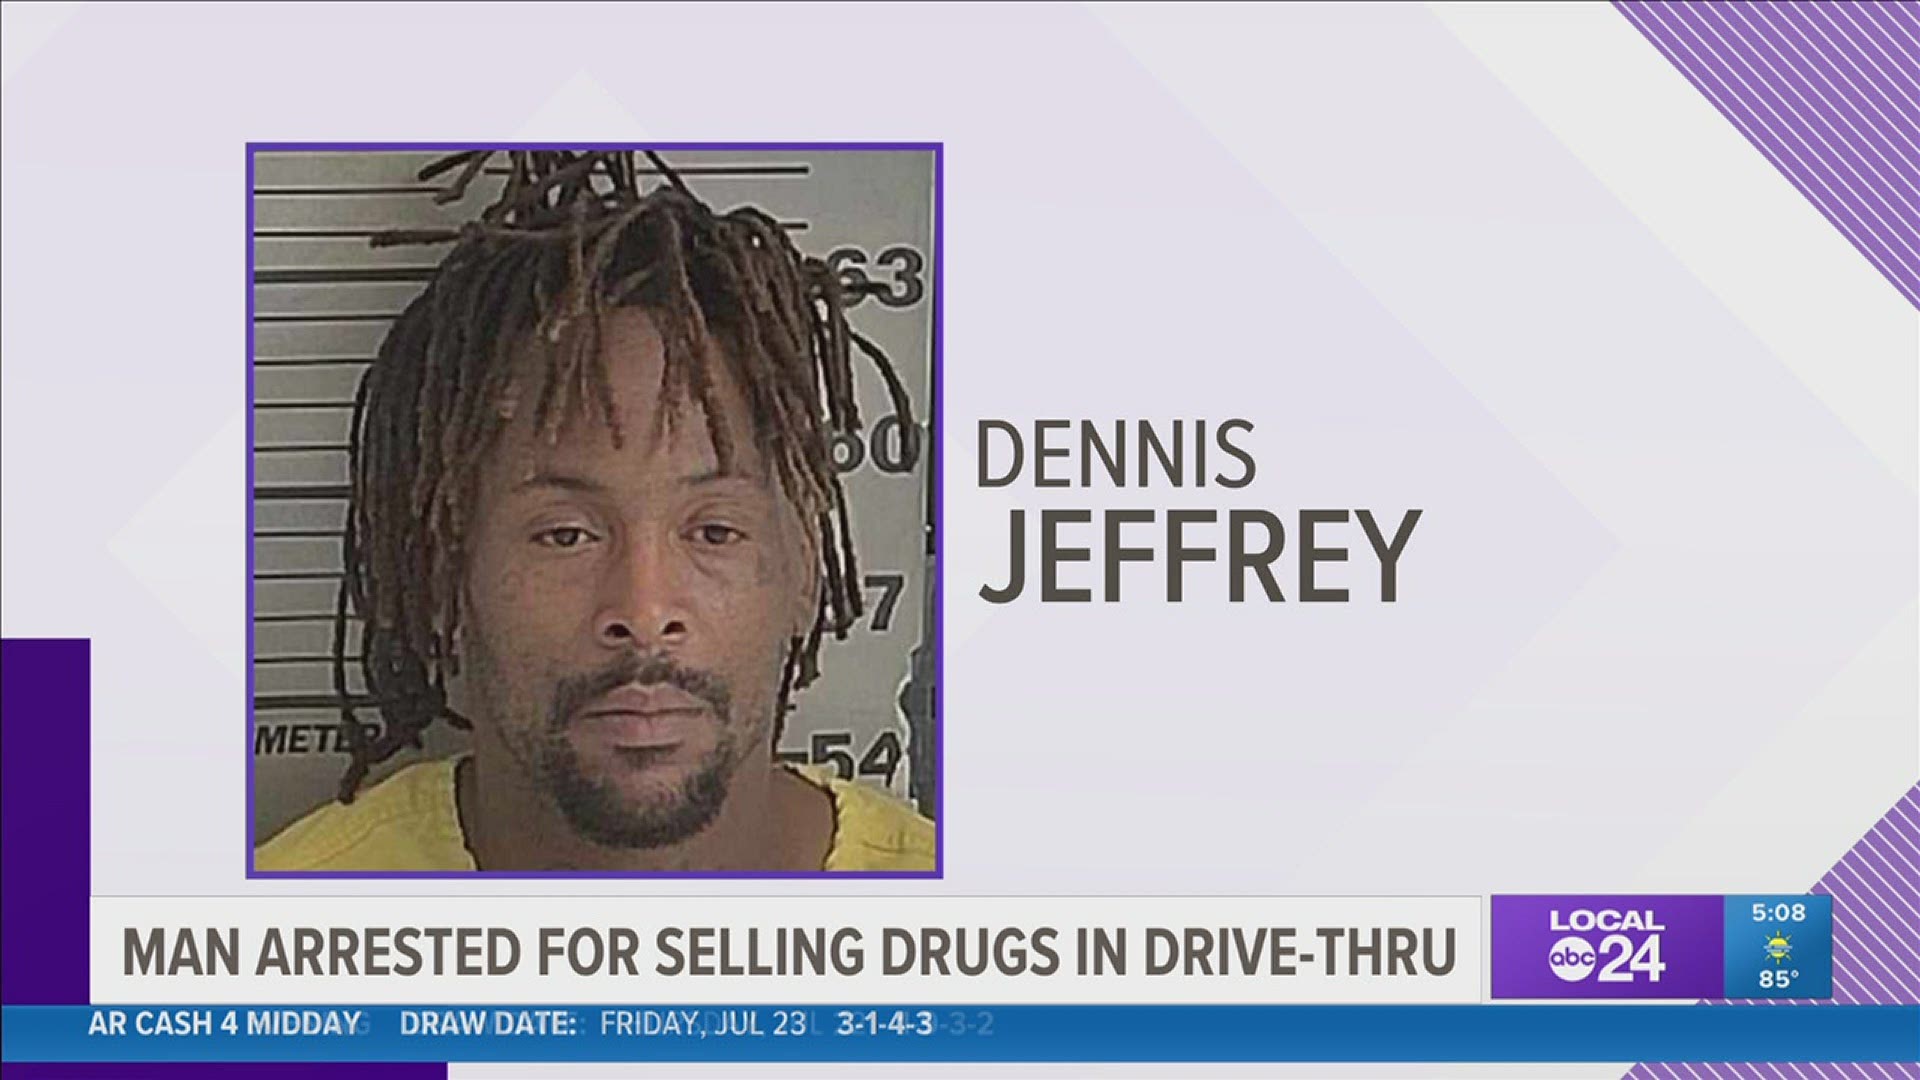 33-year-old Dennis Jeffrey is charged with drug possession and intent to sell.